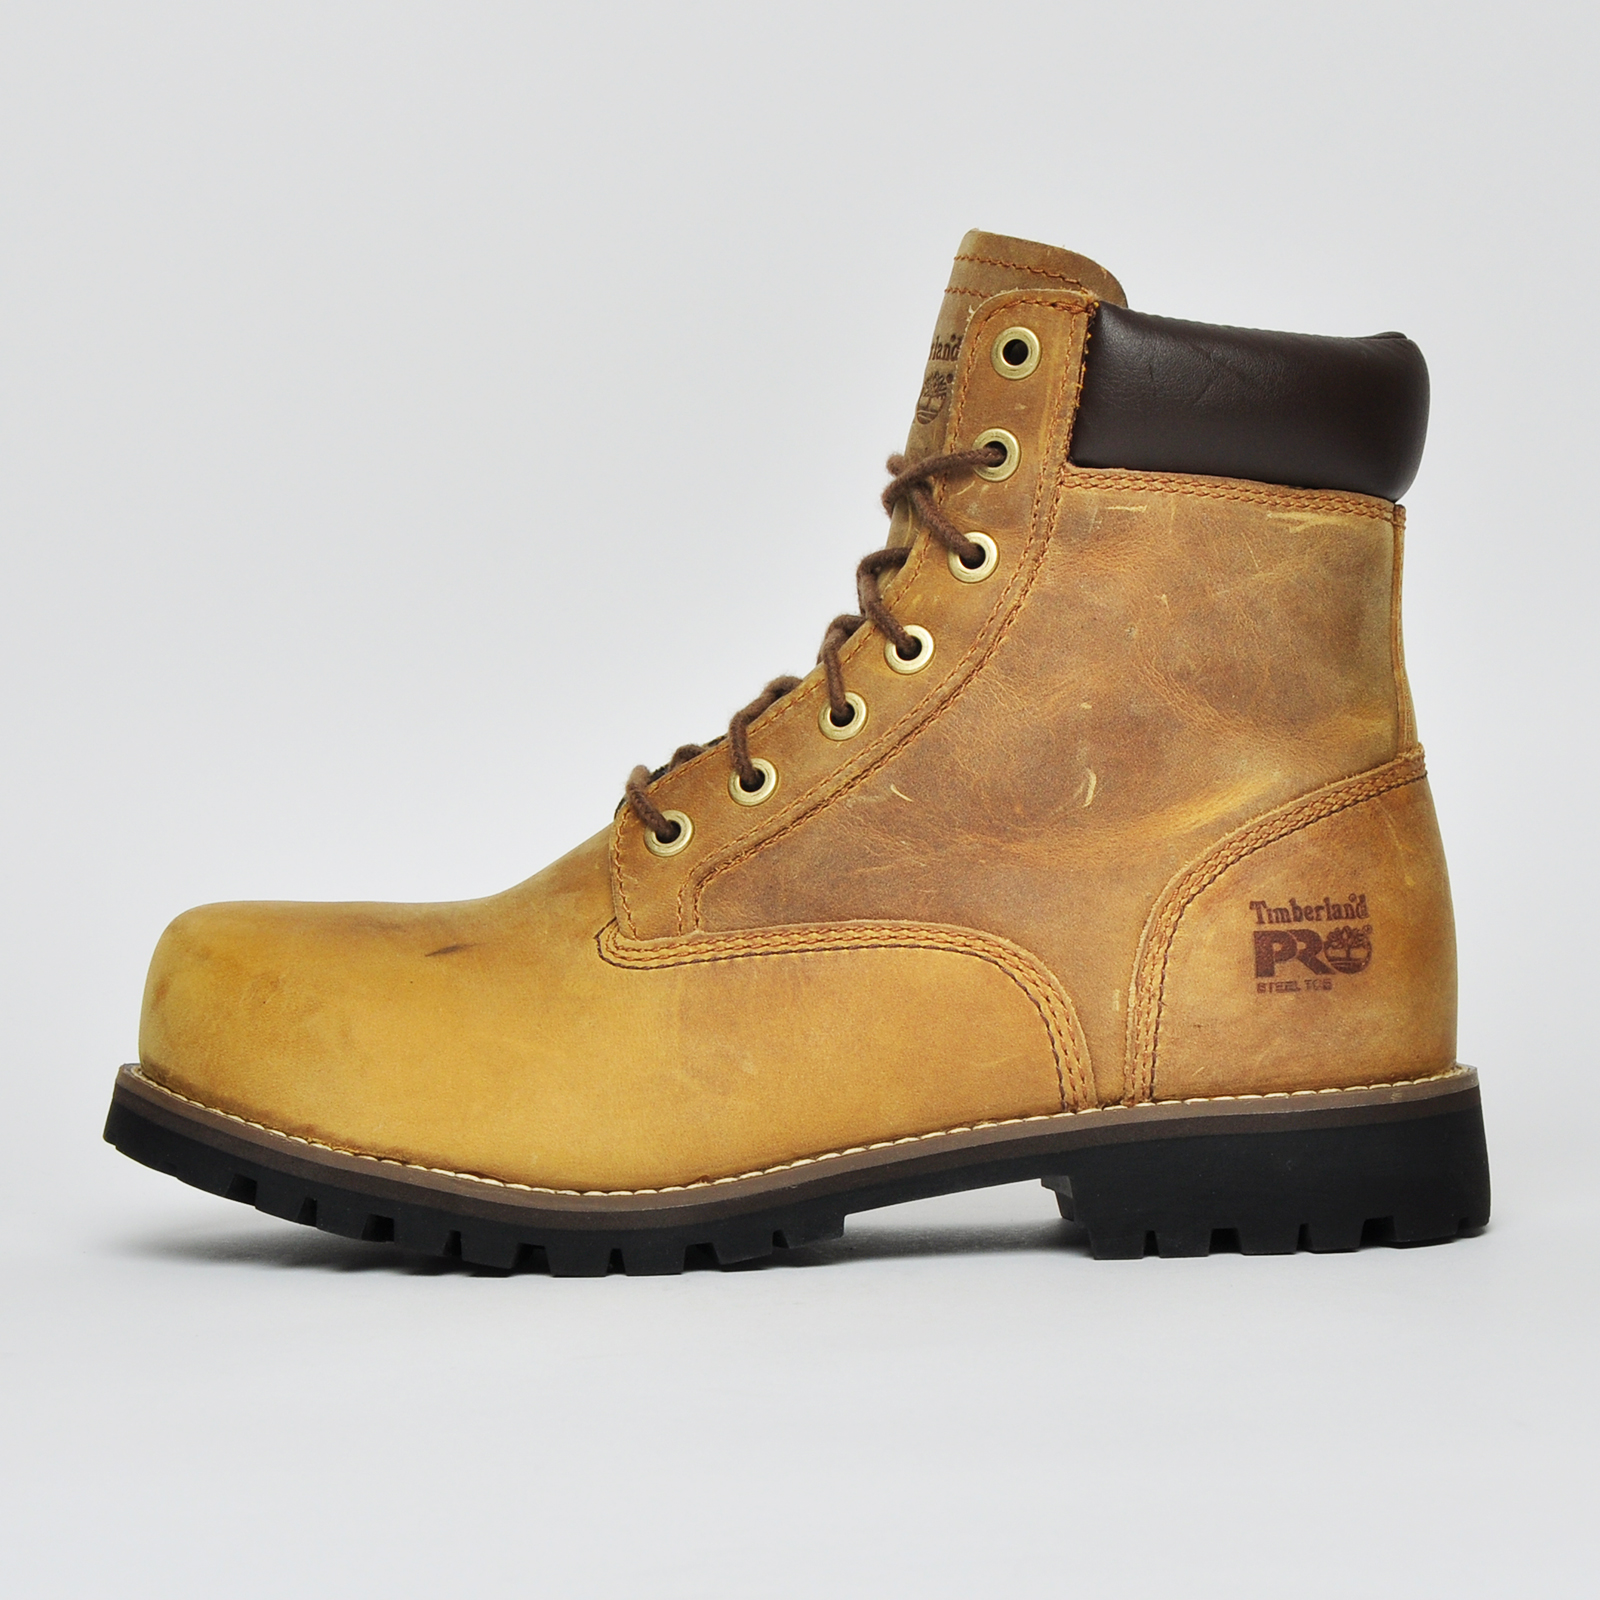 timberland pro eagle safety boot